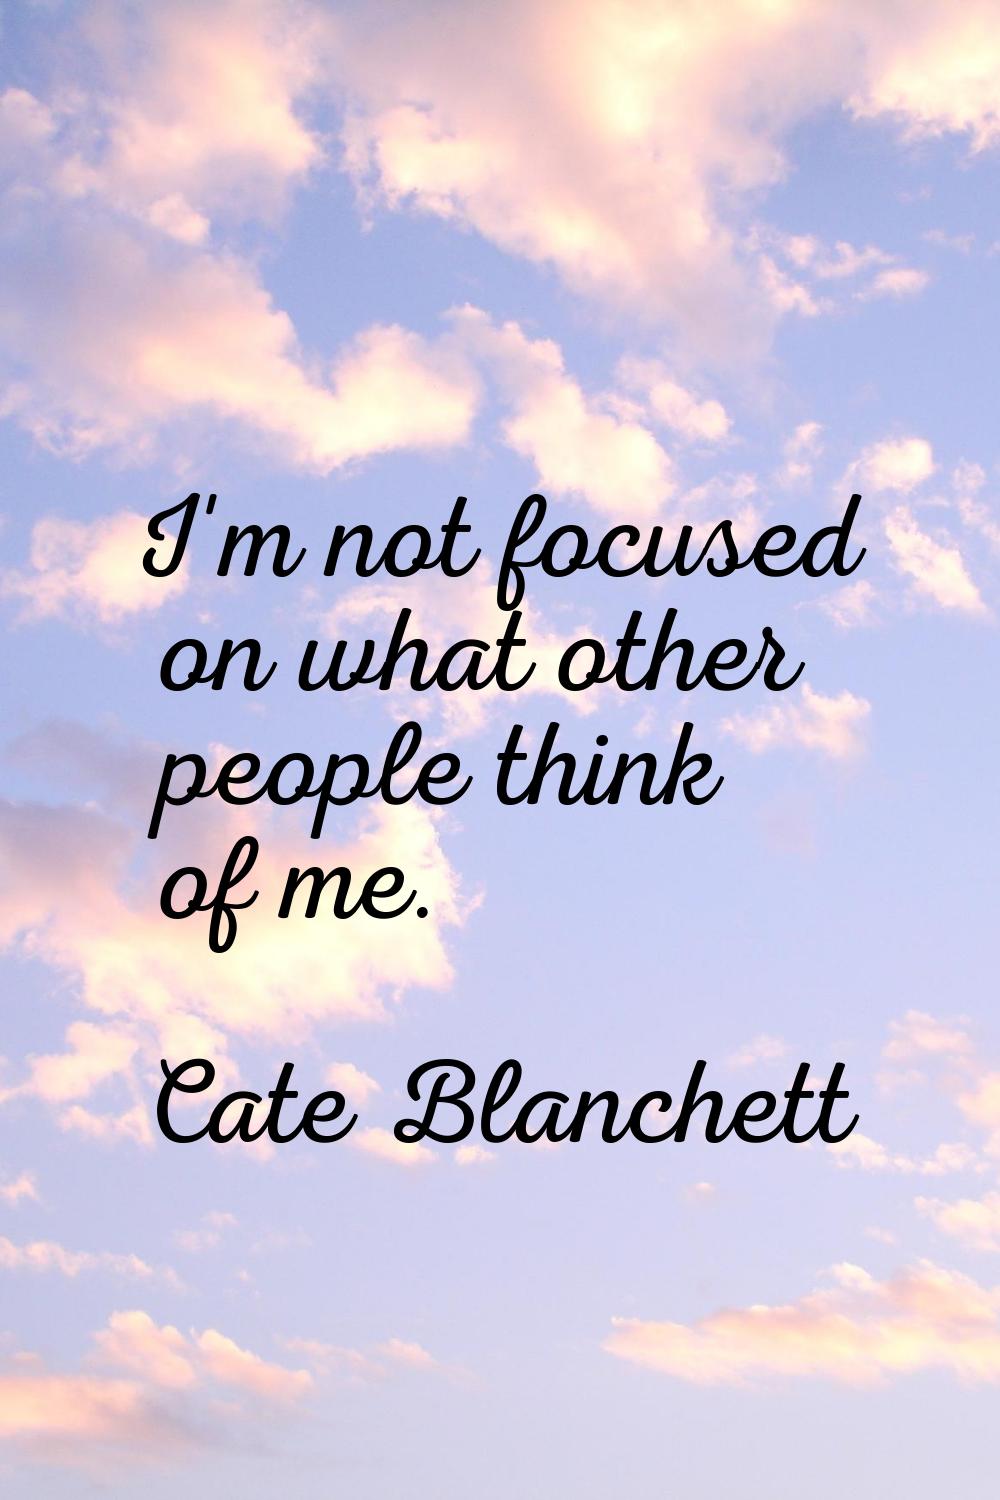 I'm not focused on what other people think of me.